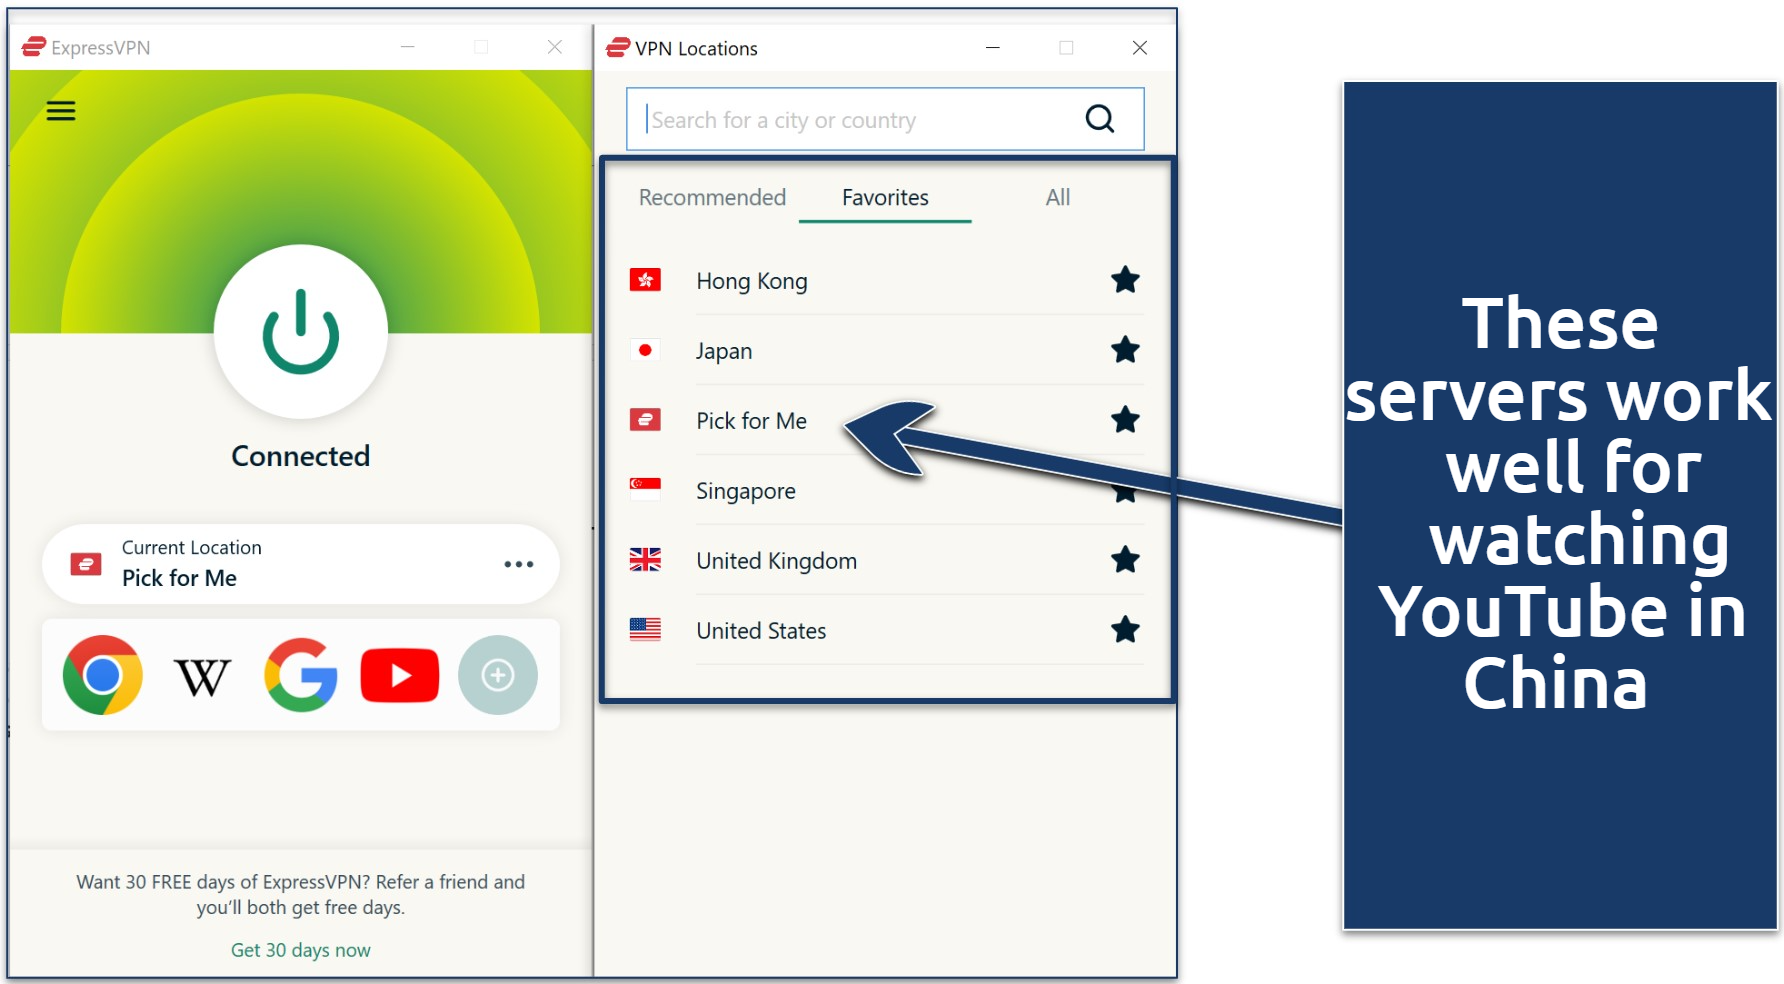 Screenshot of the ExpressVPN Windows app connected to 'Pick for Me' server with 'Favorite' VPN location list. 